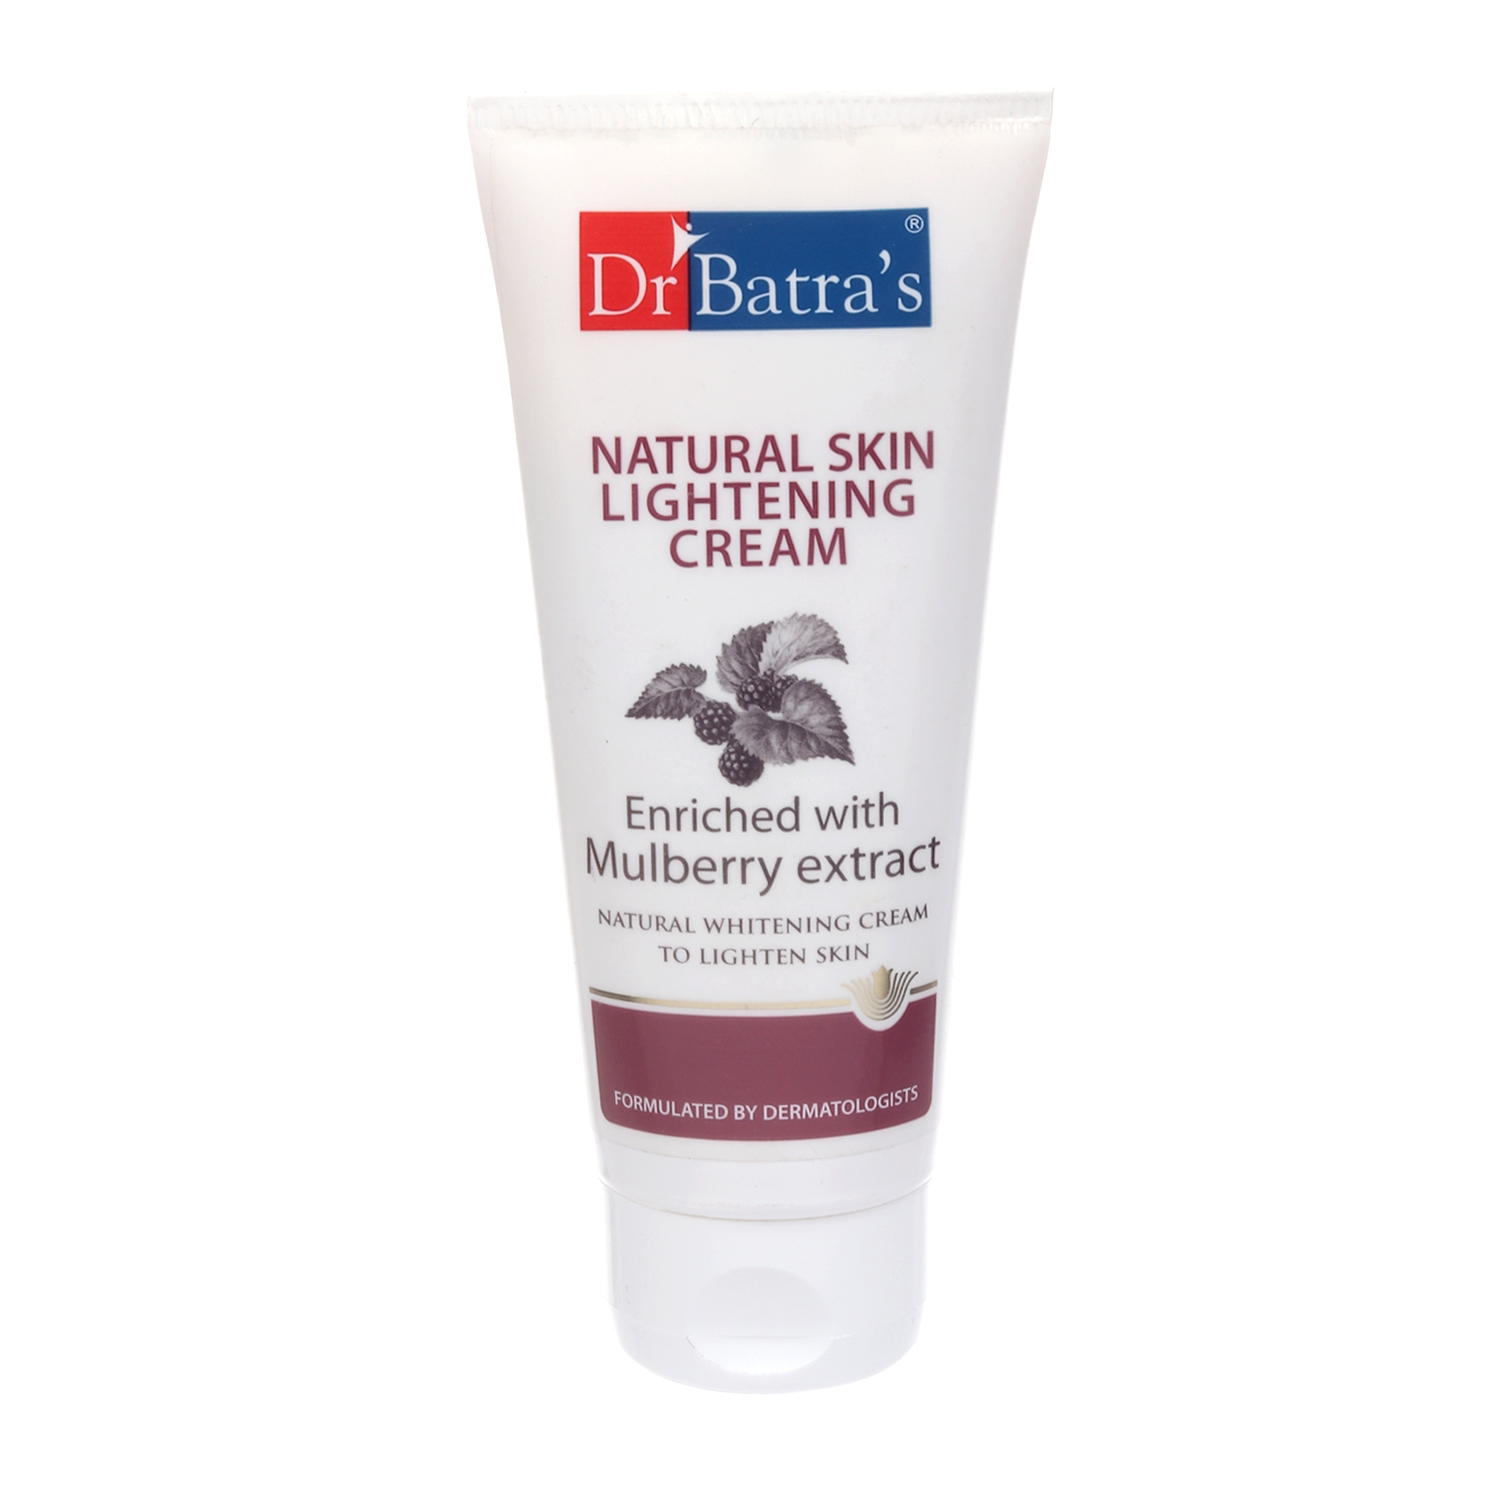 Dr Batra's Natural Skin Lightening Cream Enriched With Mulberry Extract - 100 gm